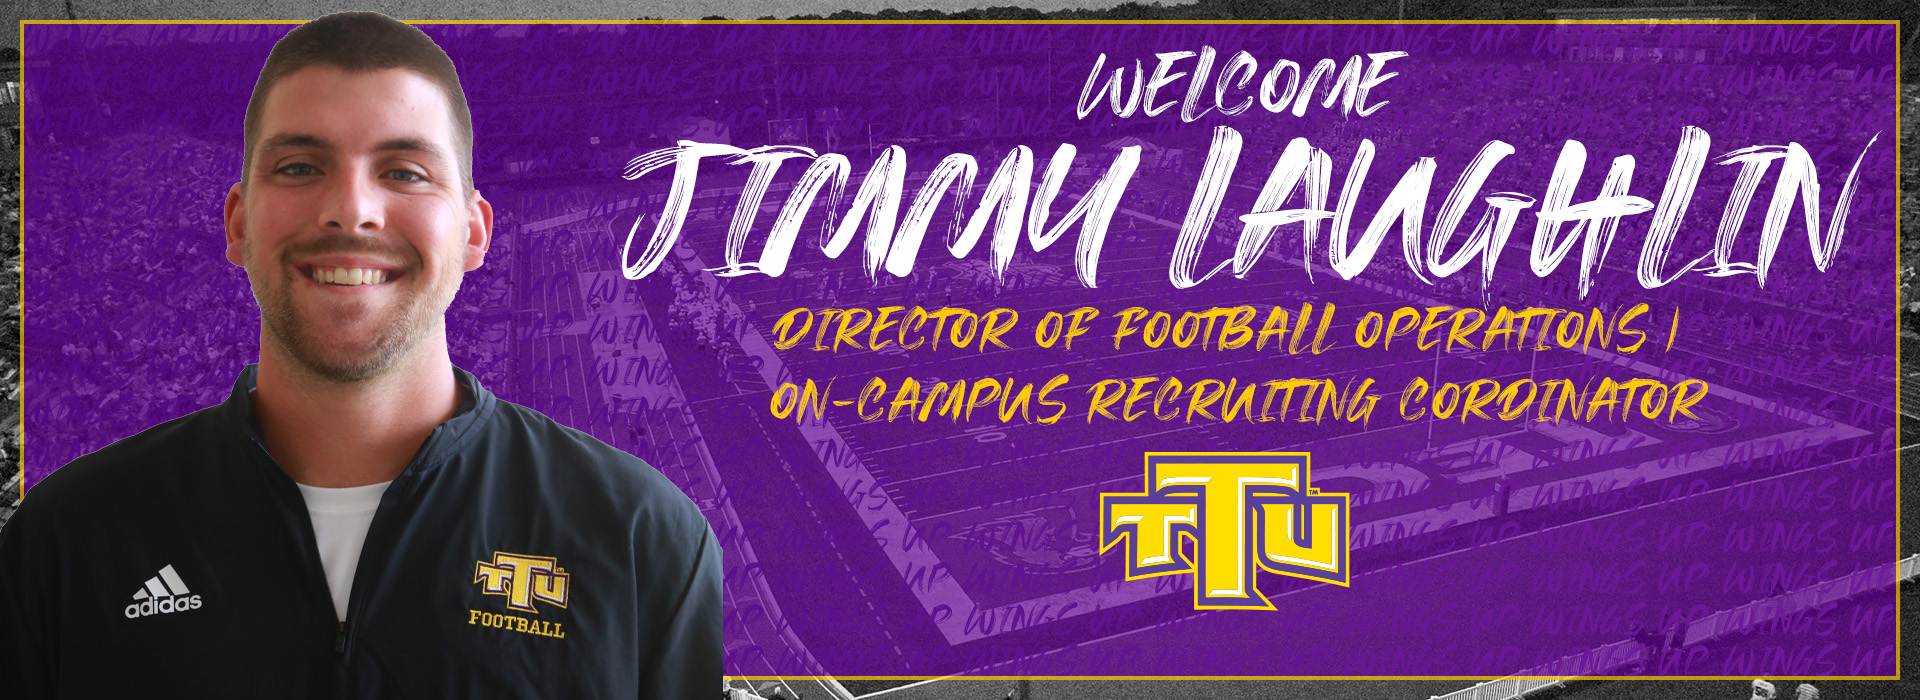 Laughlin named director of football operations/on-campus recruiting coordinator for Tech Football